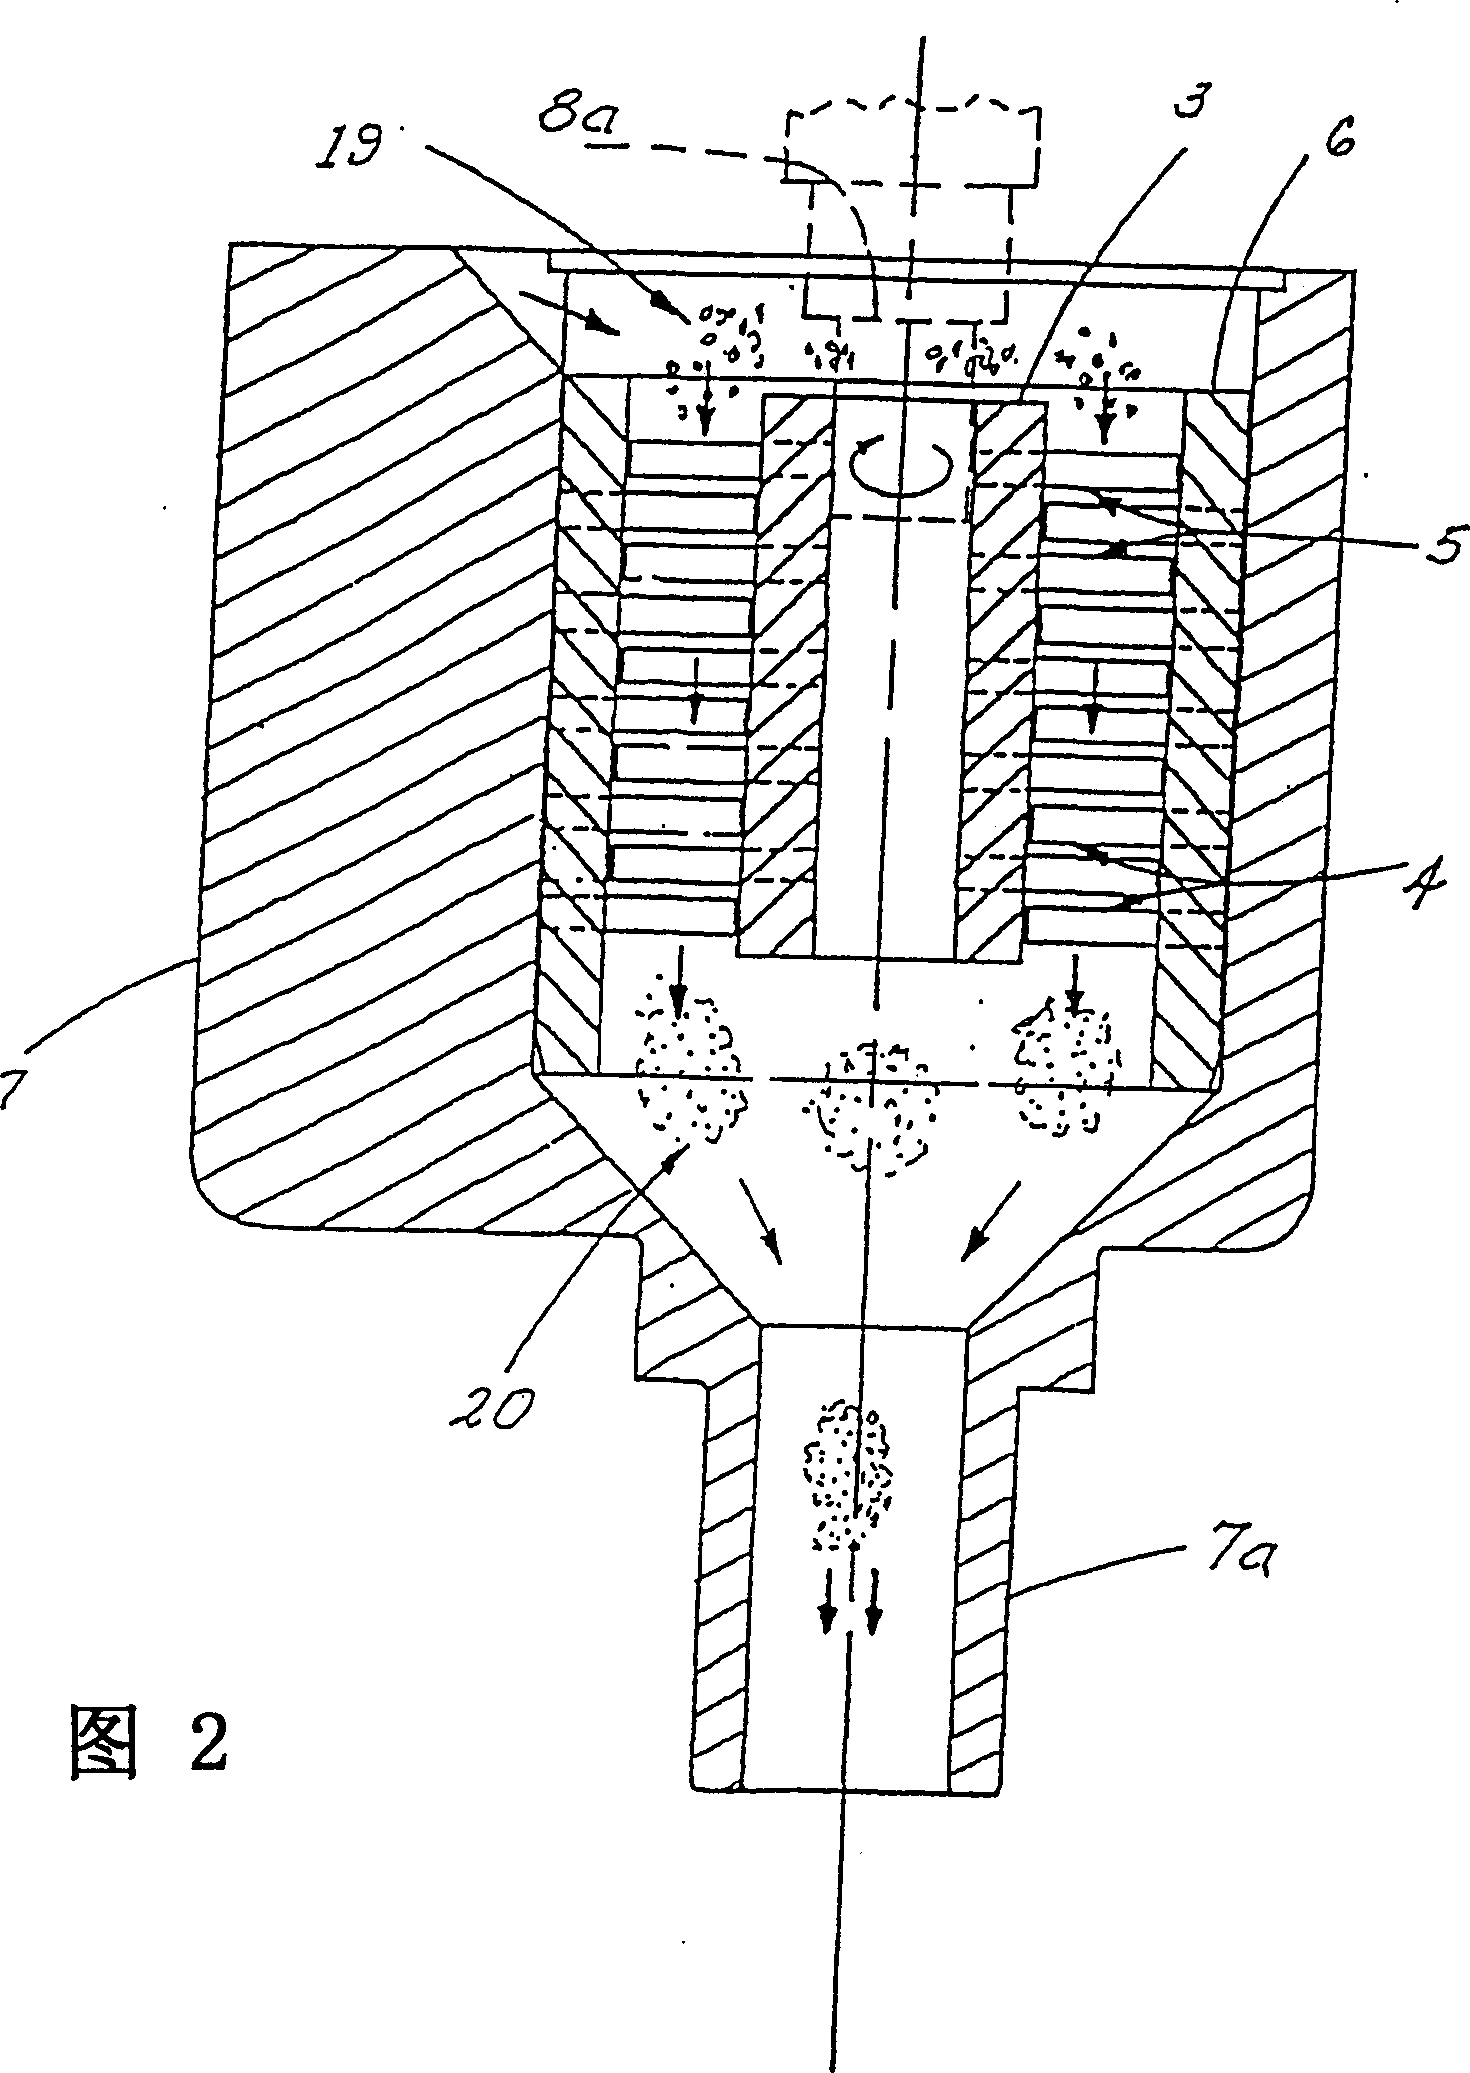 Mechanical fuel gasification apparatus